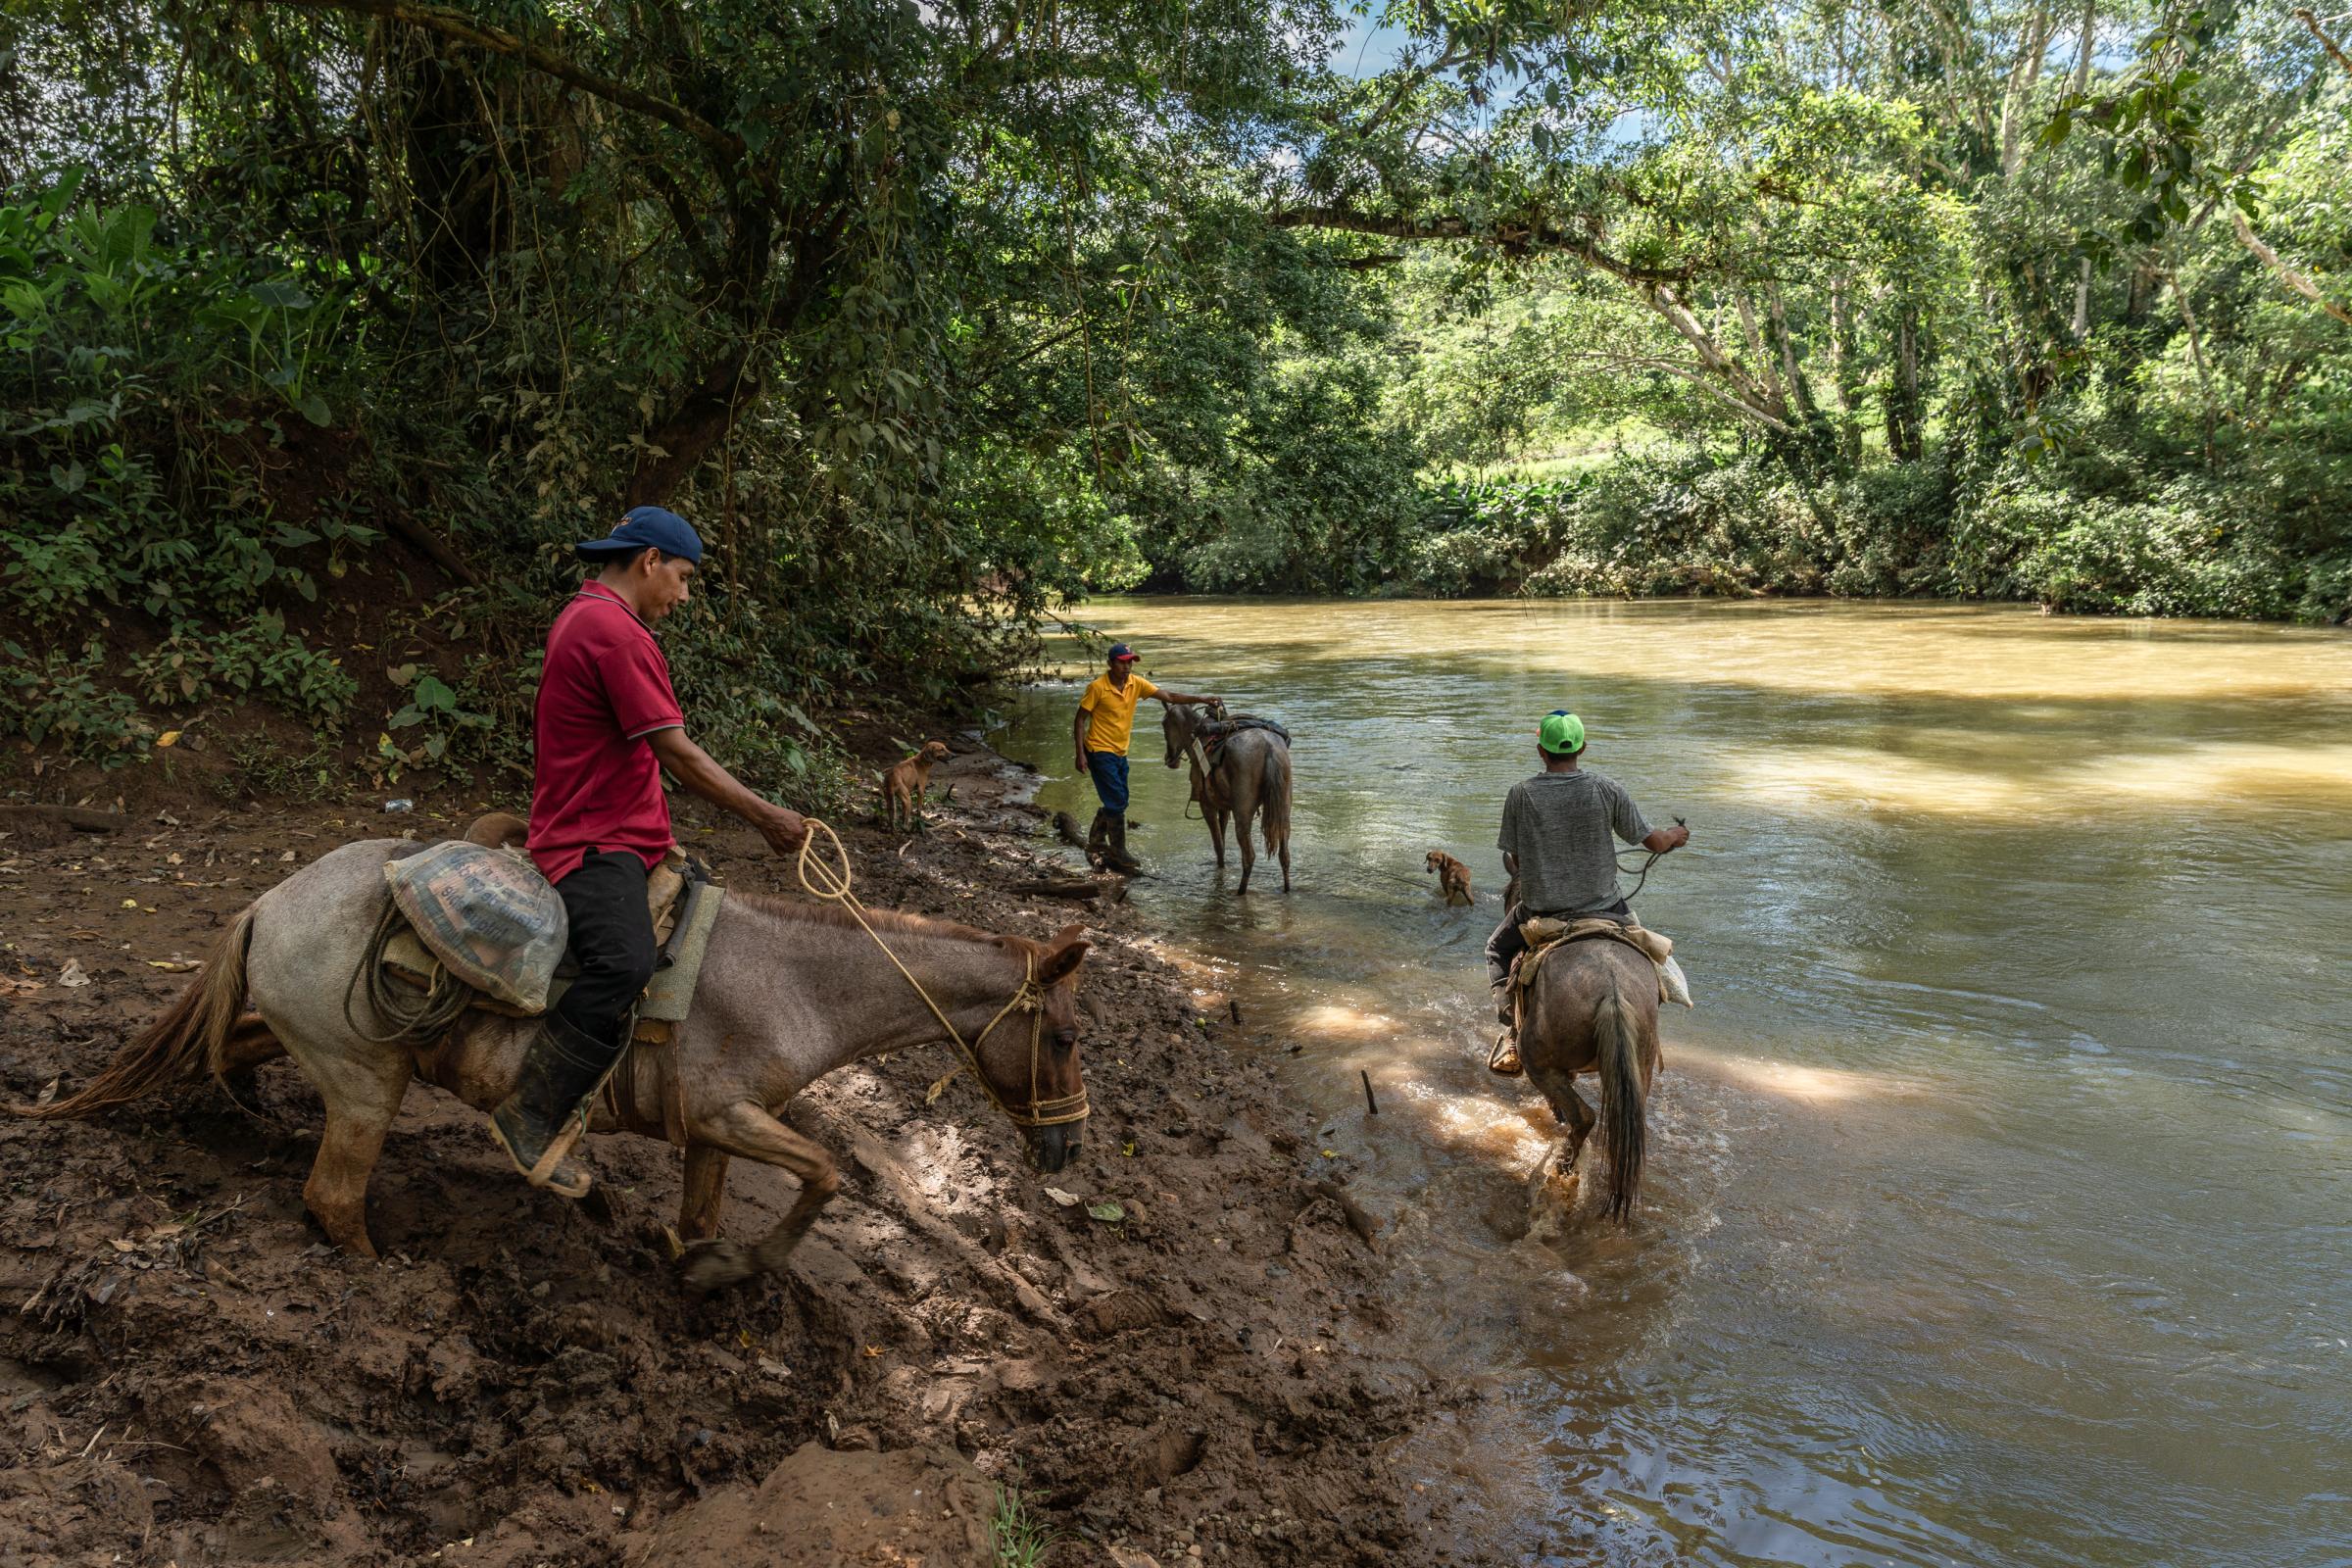 Bloomberg: Saving the Panama Canal Will Take Years and Cost Billions, If It’s Even Possible - Locals riding horses to cross the  Indio River, main river that could flood what might be the new...